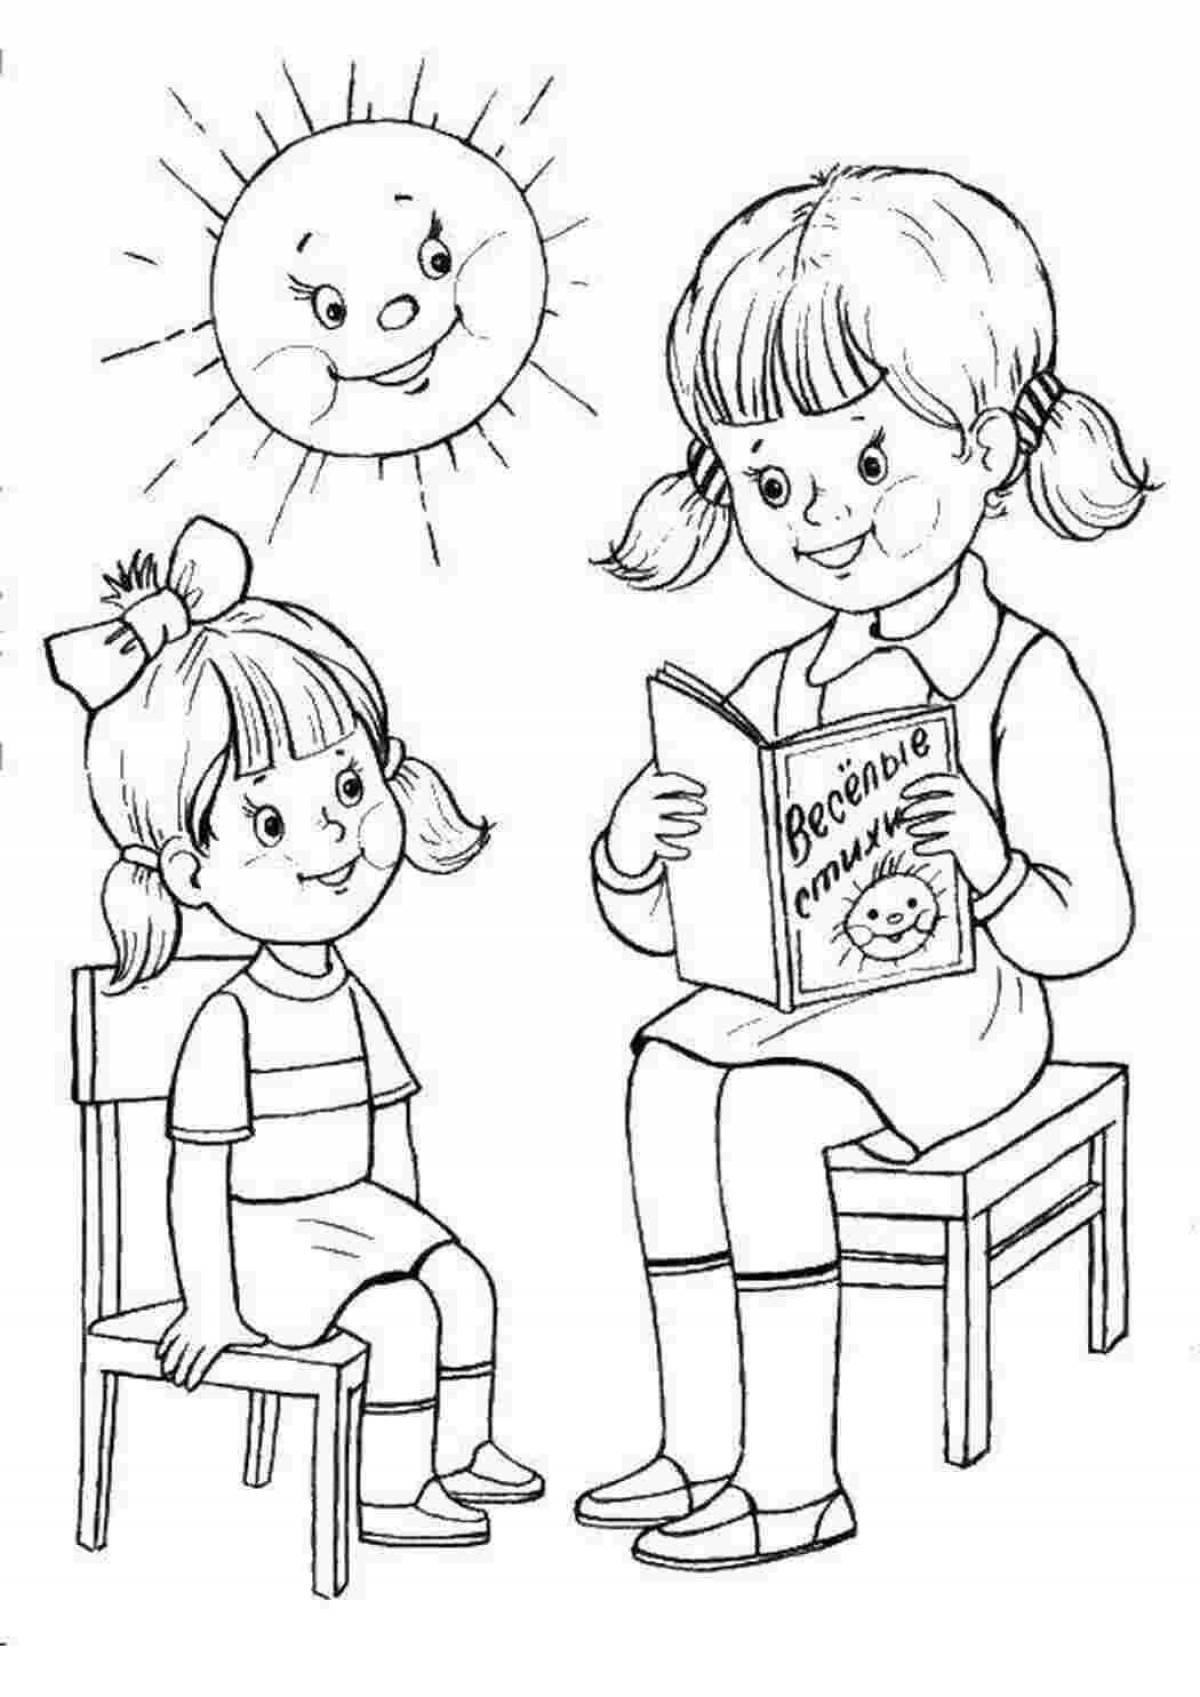 Colorful good deeds coloring page